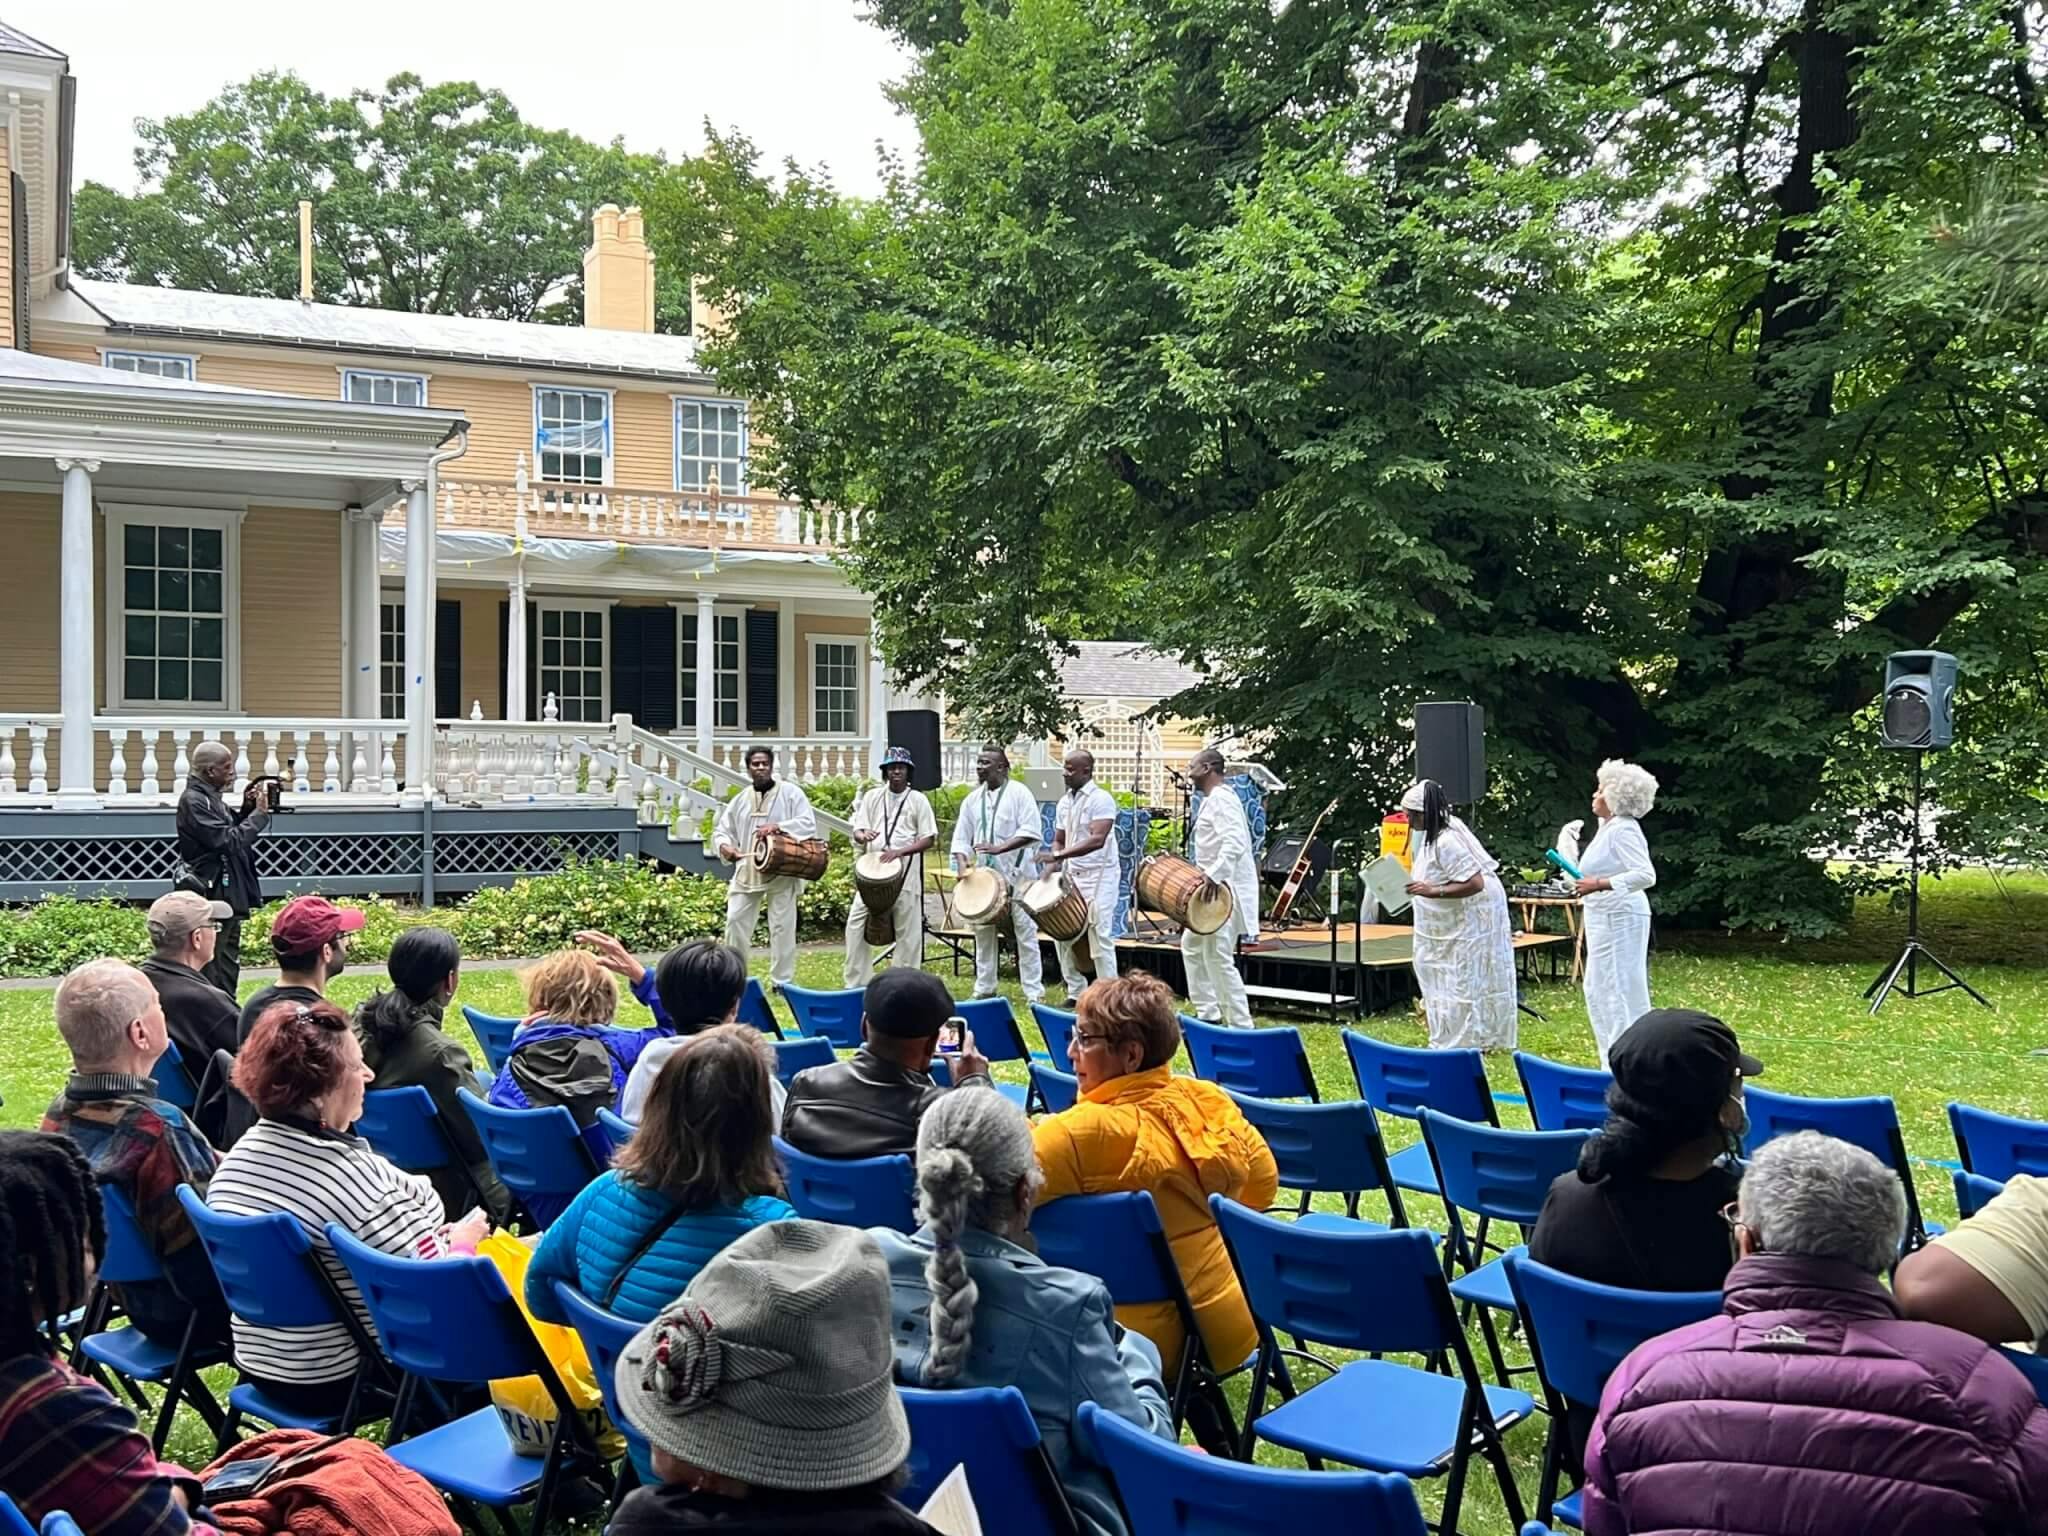 Image of the annual Juneteenth Gathering at Longfellow House-Washington’s Headquarters in 2022.